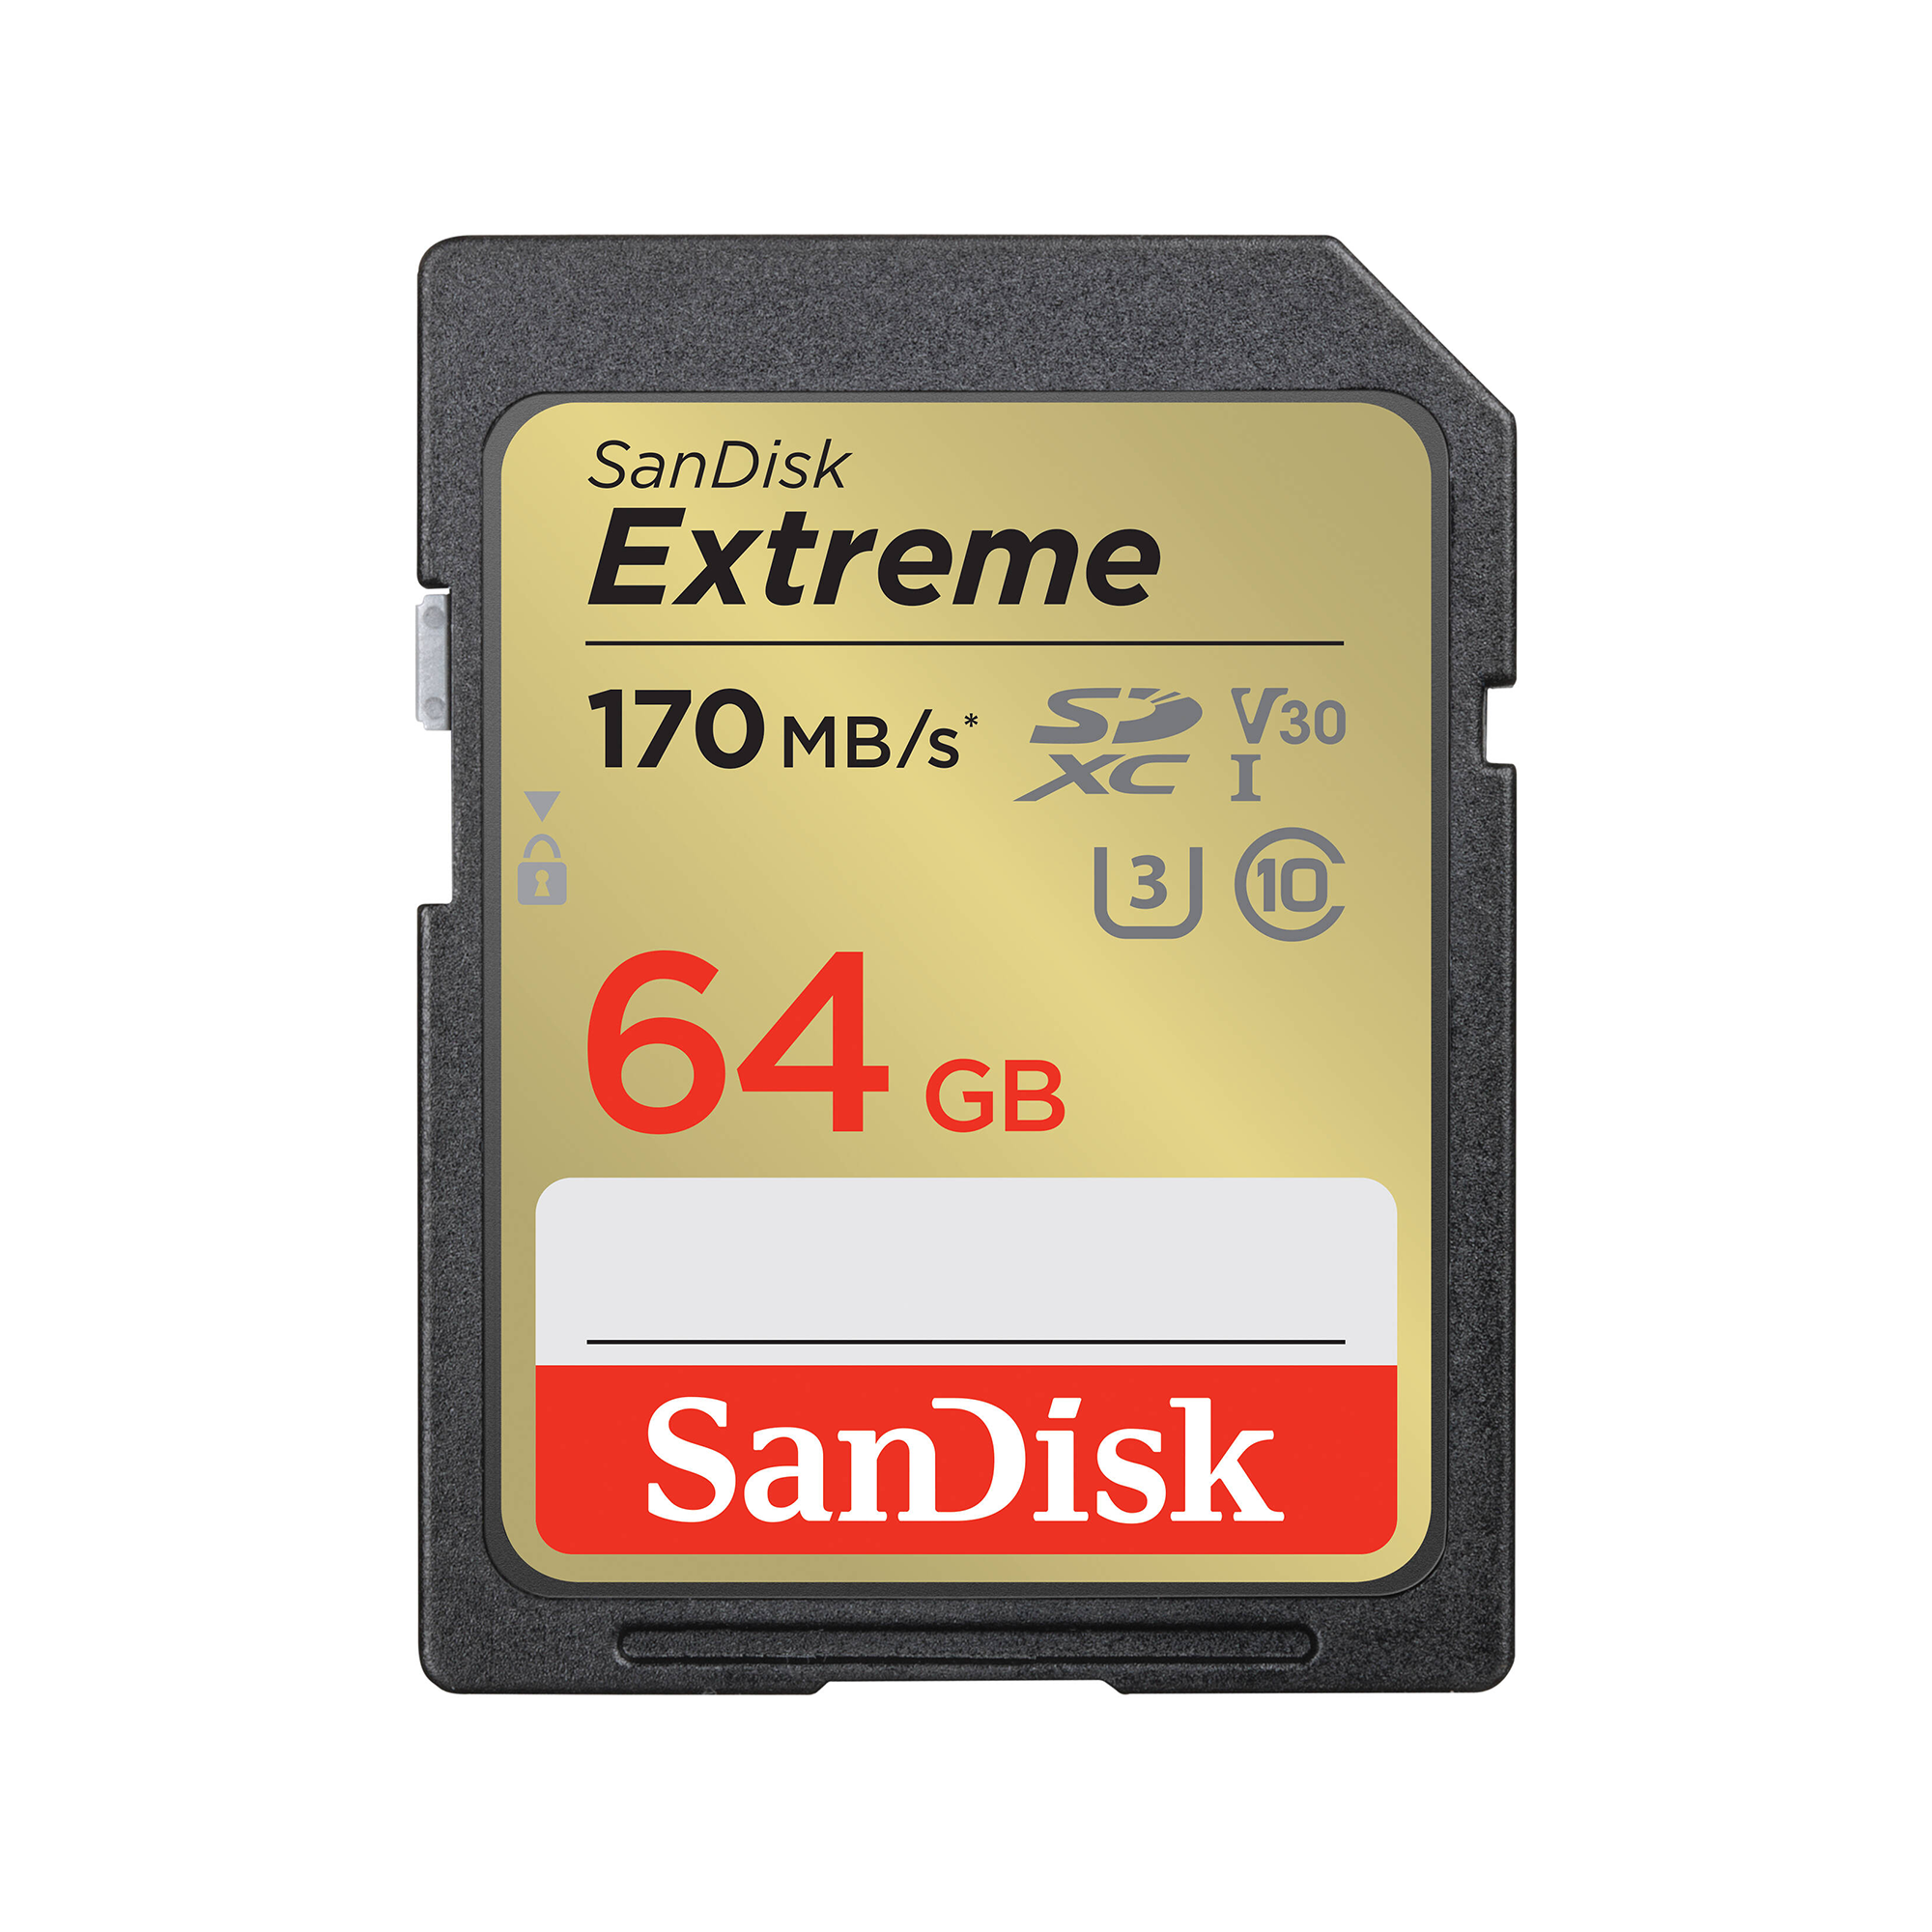 SanDisk Extreme SD UHS I 64GB Card for 4K Video 170MB/s Read & 80MB/s Write